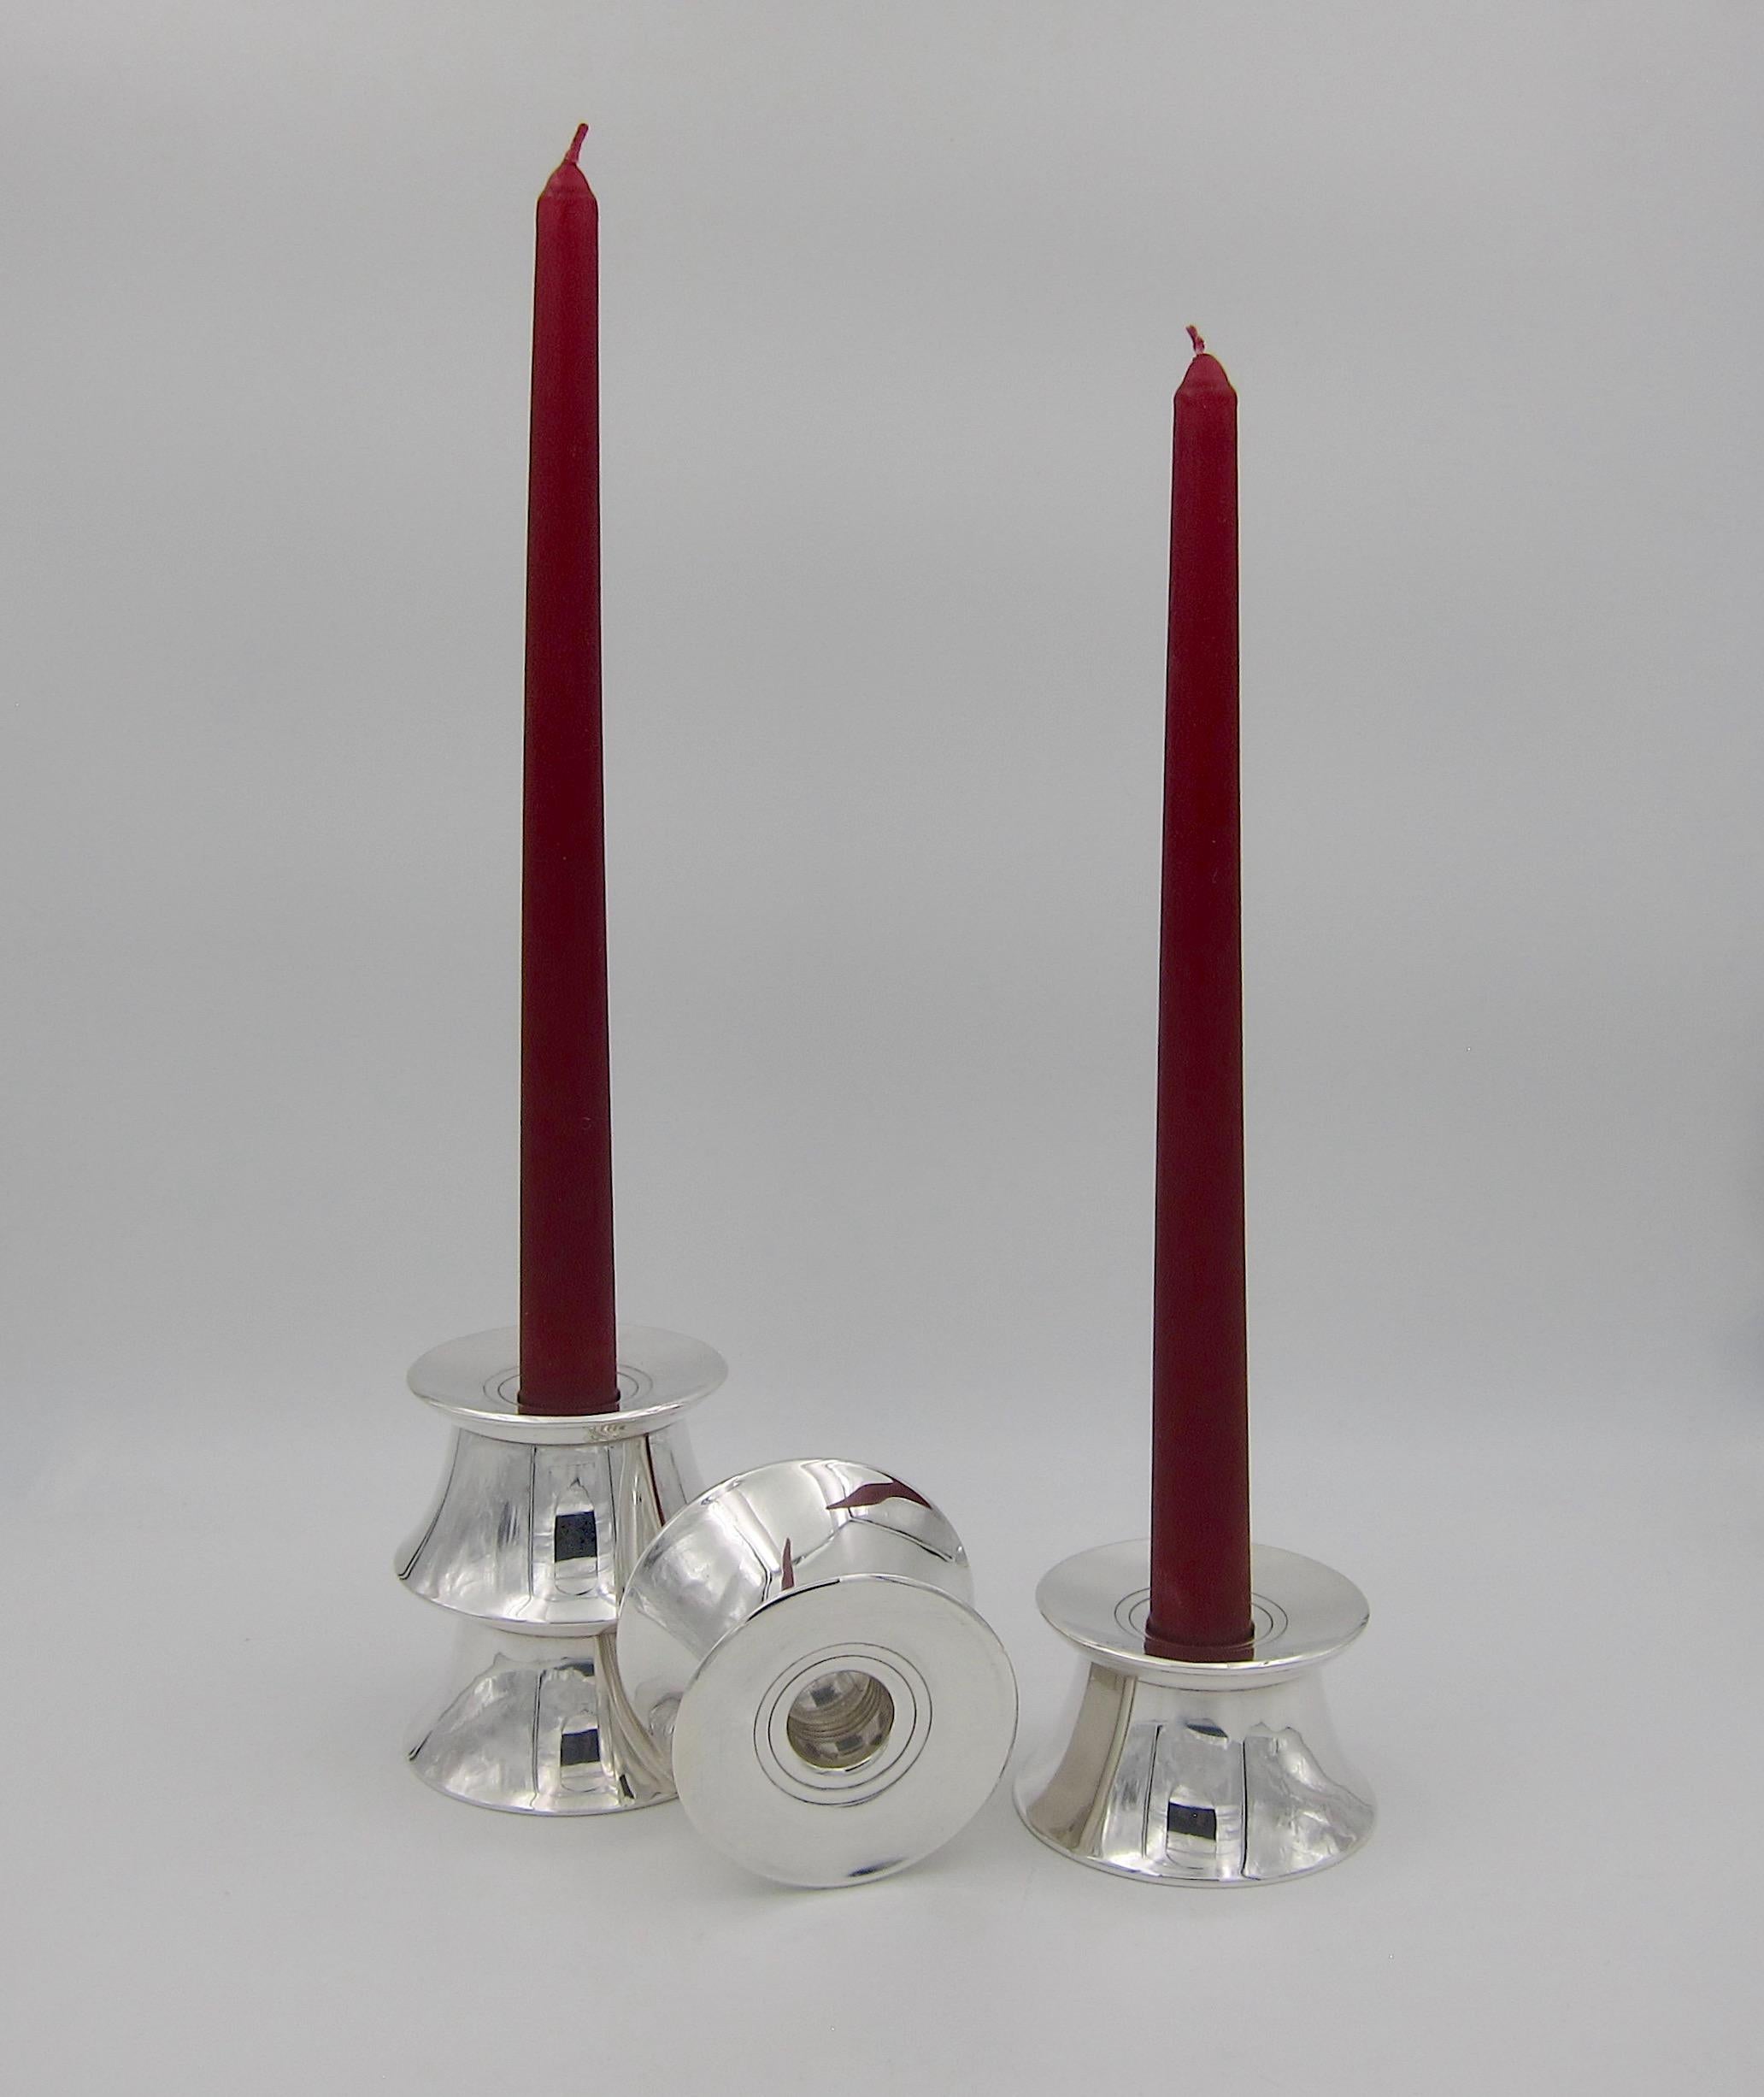 A set of four midcentury sterling silver candleholders from Gorham Manufacturing Company of Providence, Rhode Island. Gorham produced this Minimalist and customizable design in the 1950s for a line of modern silver hollowware called 